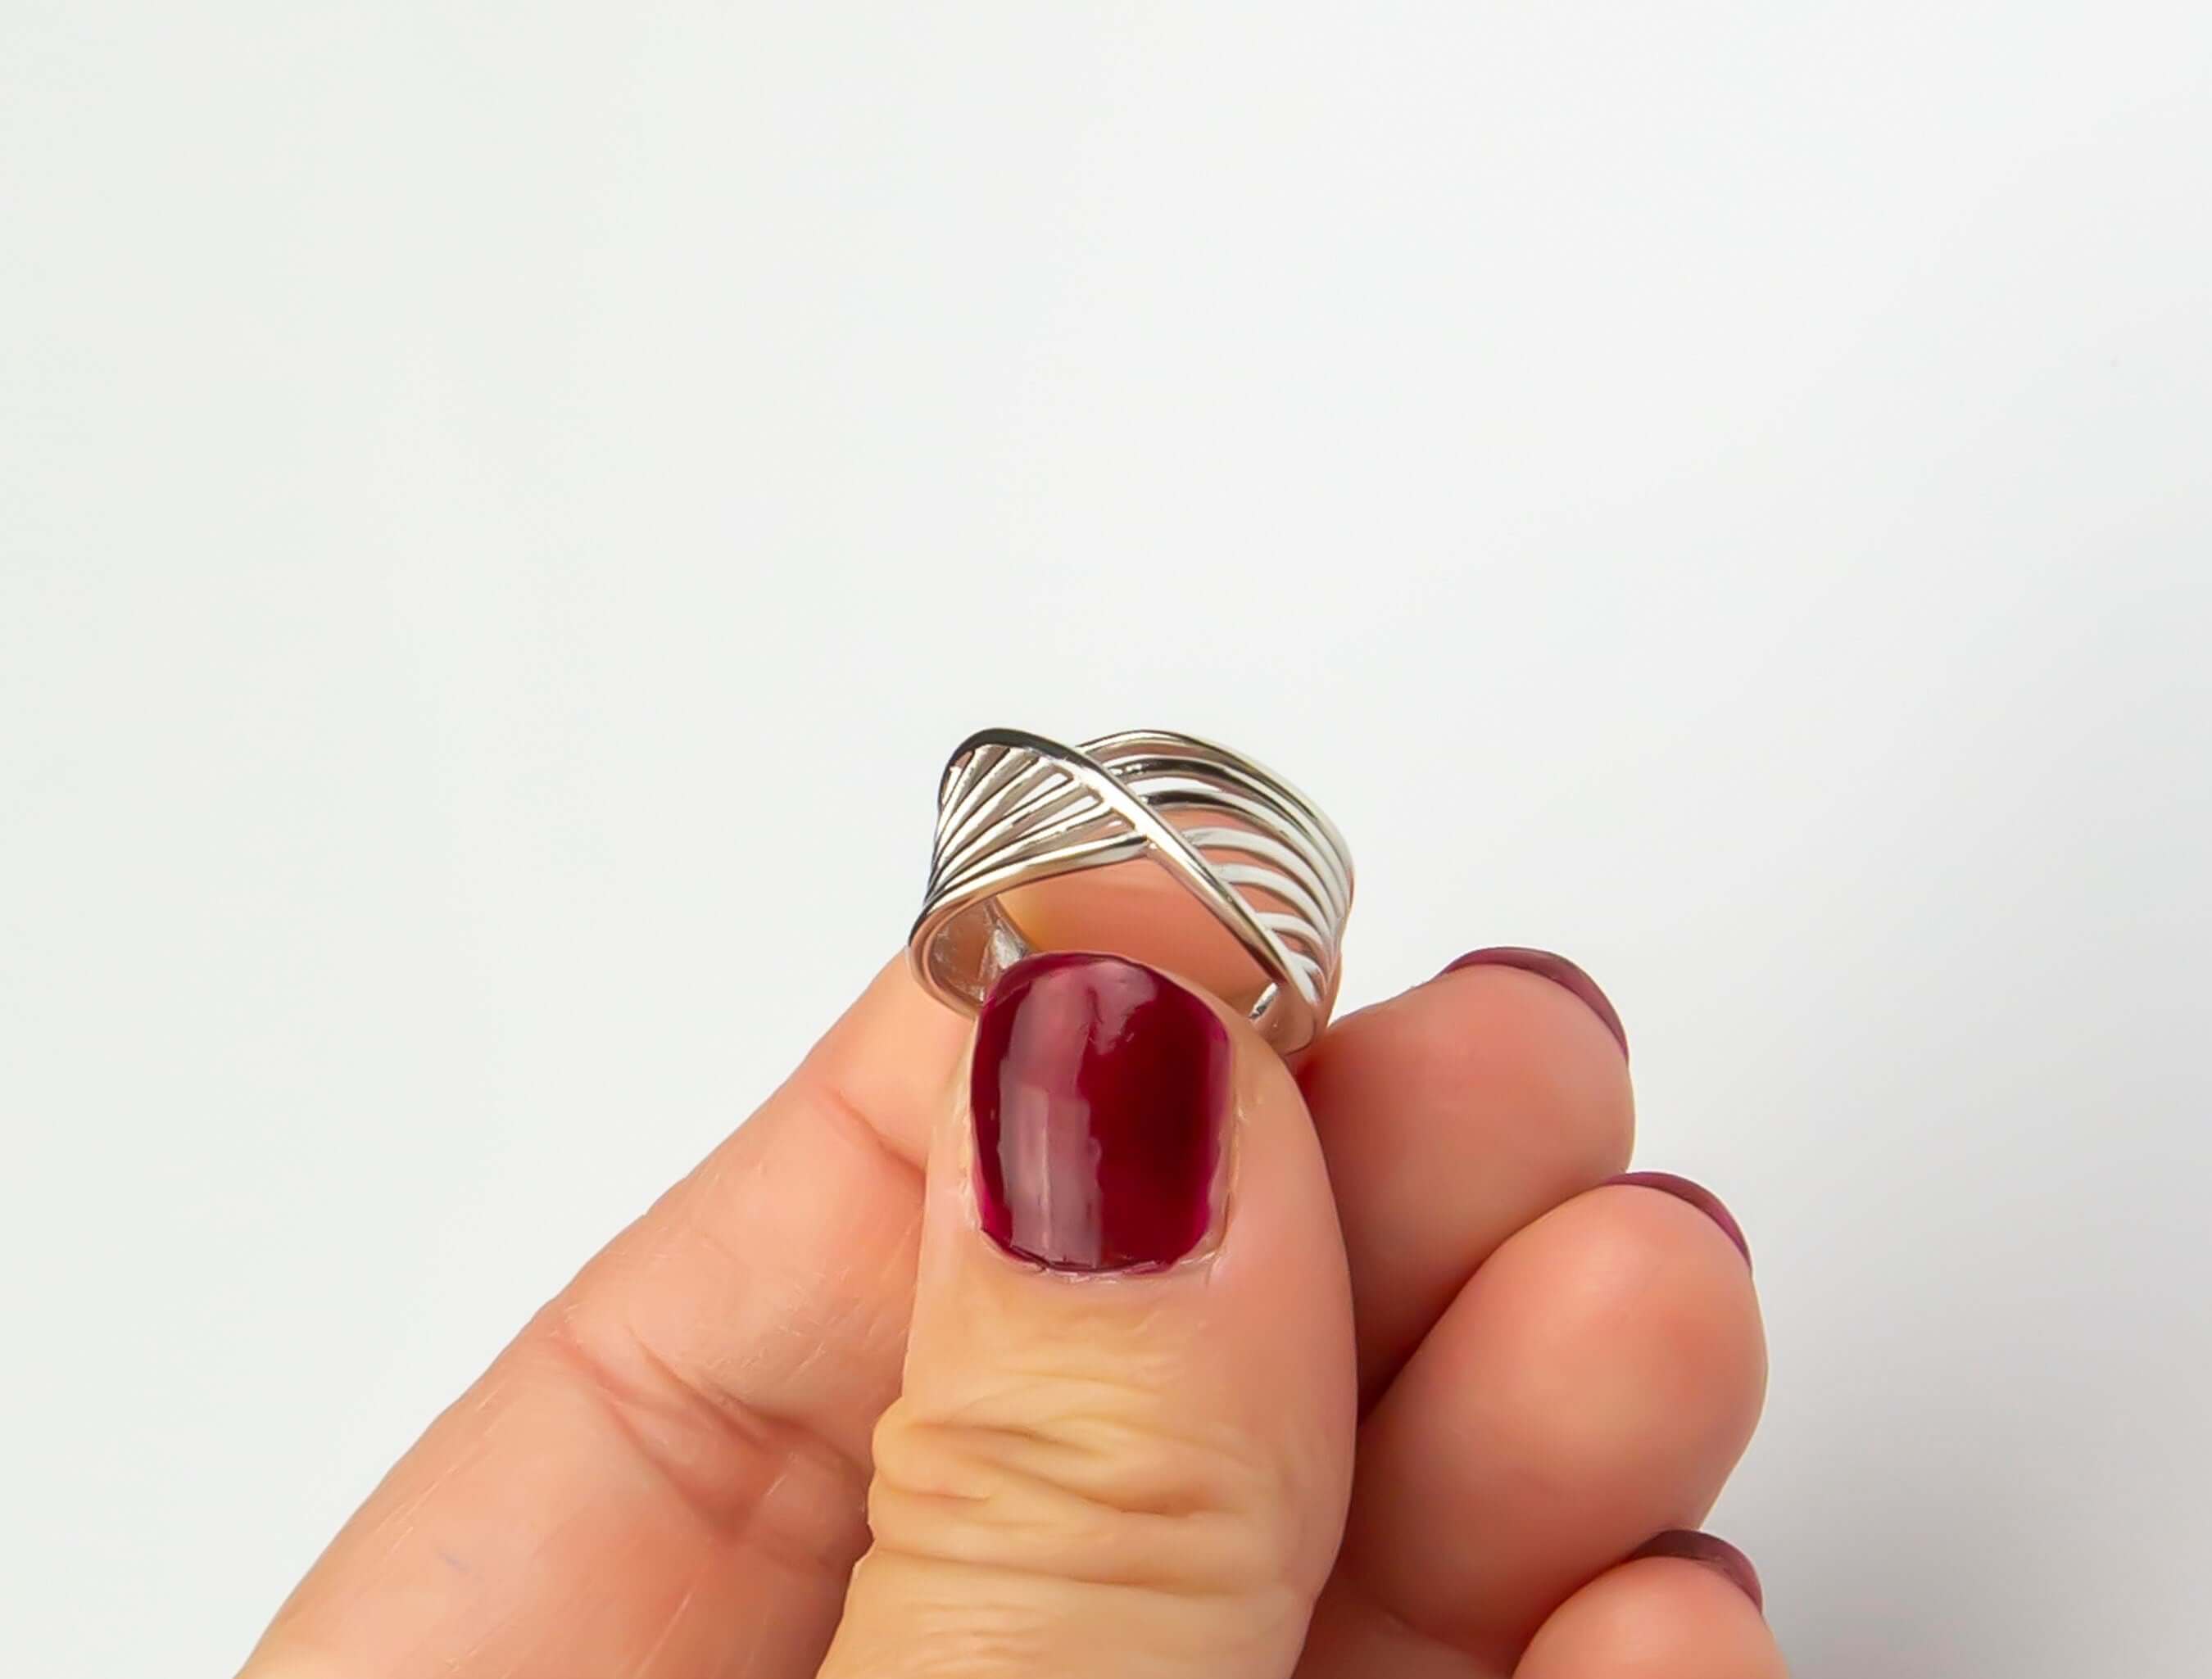 Chunky Silver Ring, Sterling Silver Statement Ring, Ring For Women, Adjustment Ring, Boho Ring, Thumb Ring, Minimalist Ring, Christmas Gifts